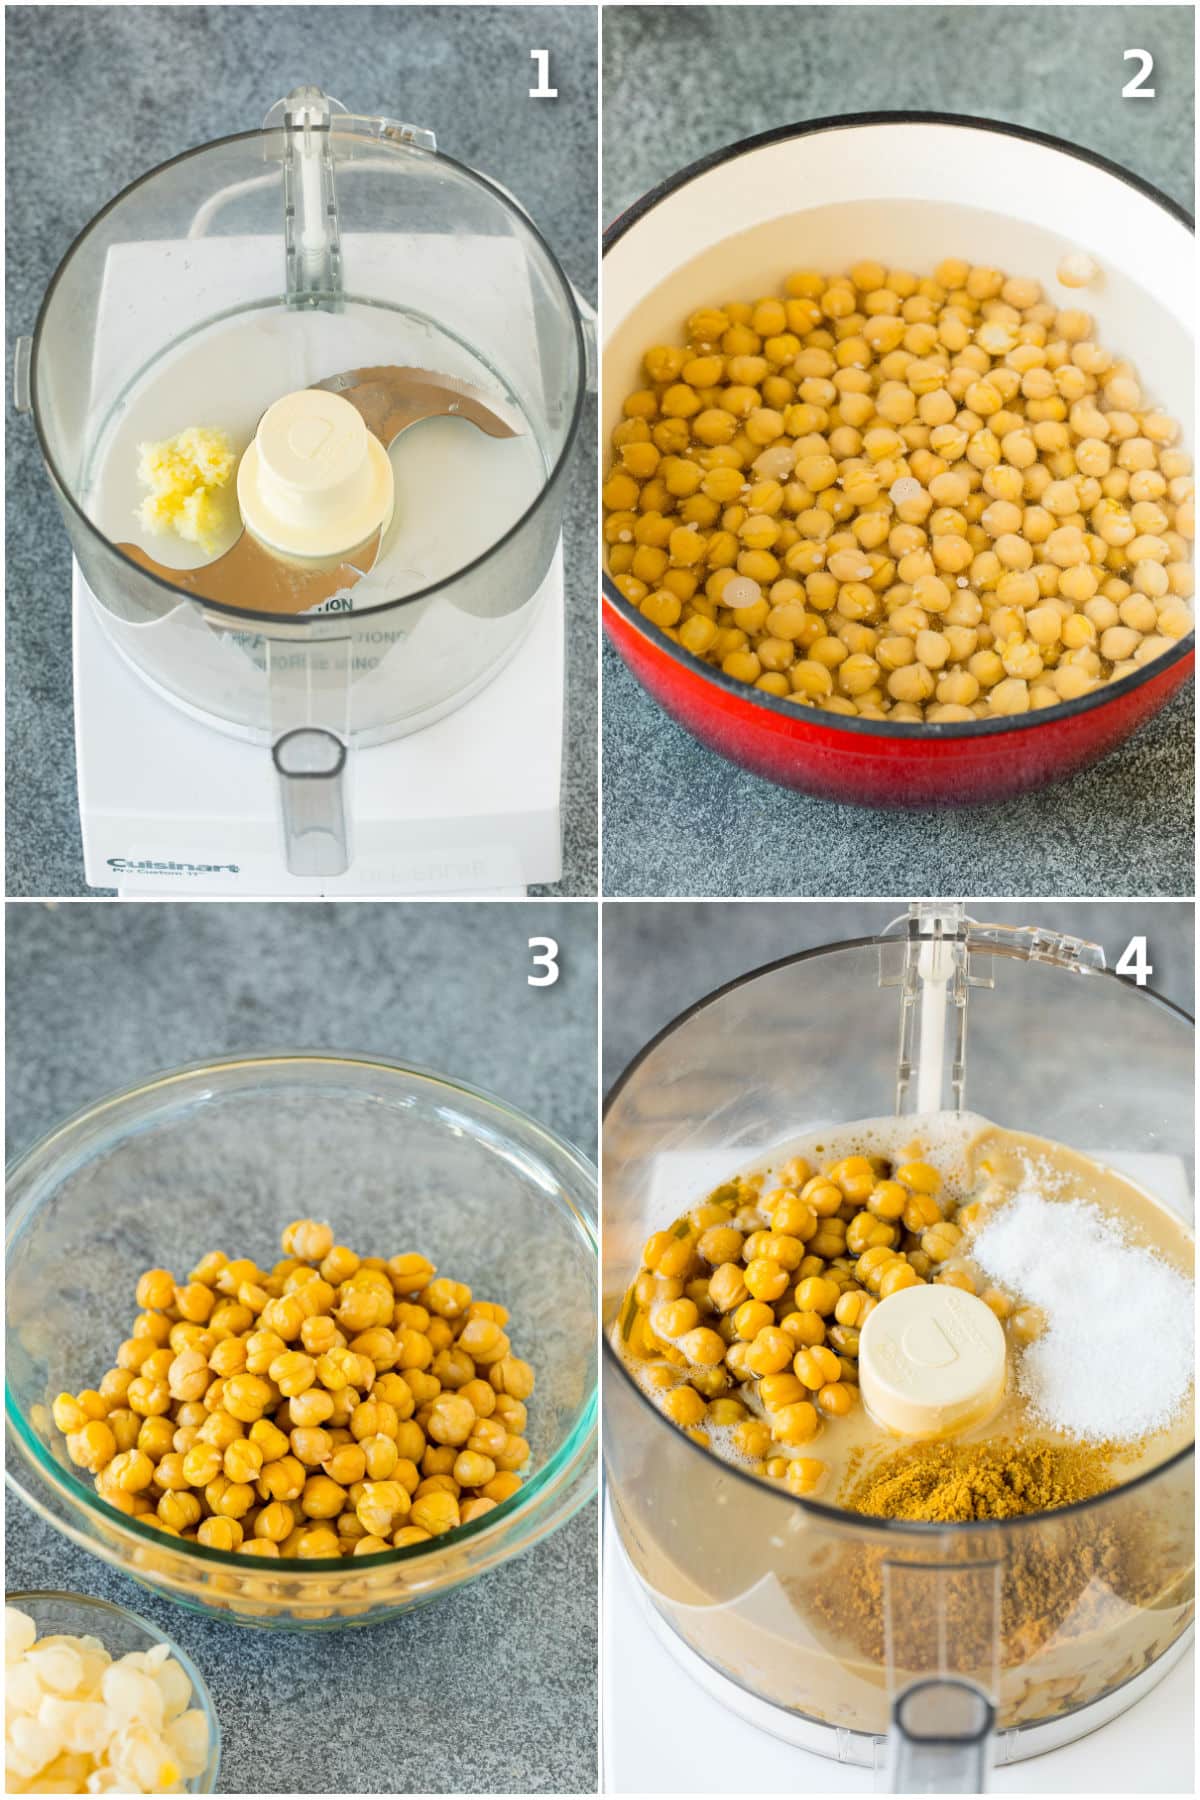 Step by step shots showing how to make homemade hummus.